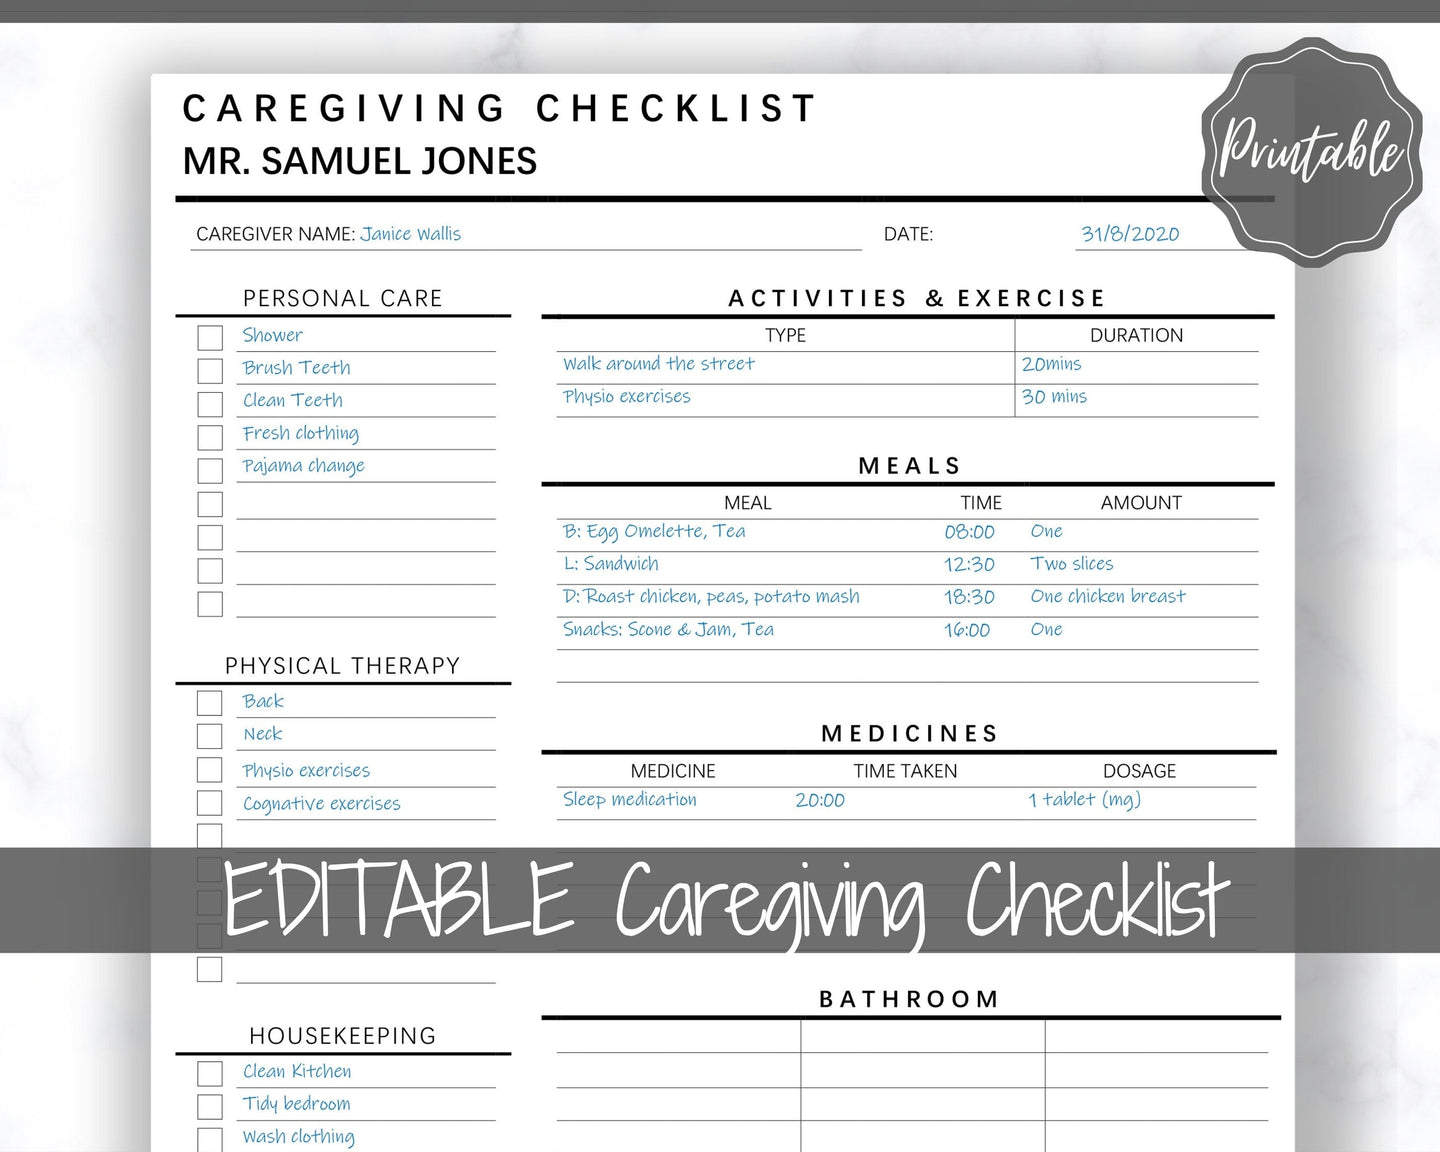 Caregiving Elderly Care Checklist. EDITABLE Printable is ideal for Caregivers. Daily cleaning, Daily Tasks, Housekeeping, Care log Template